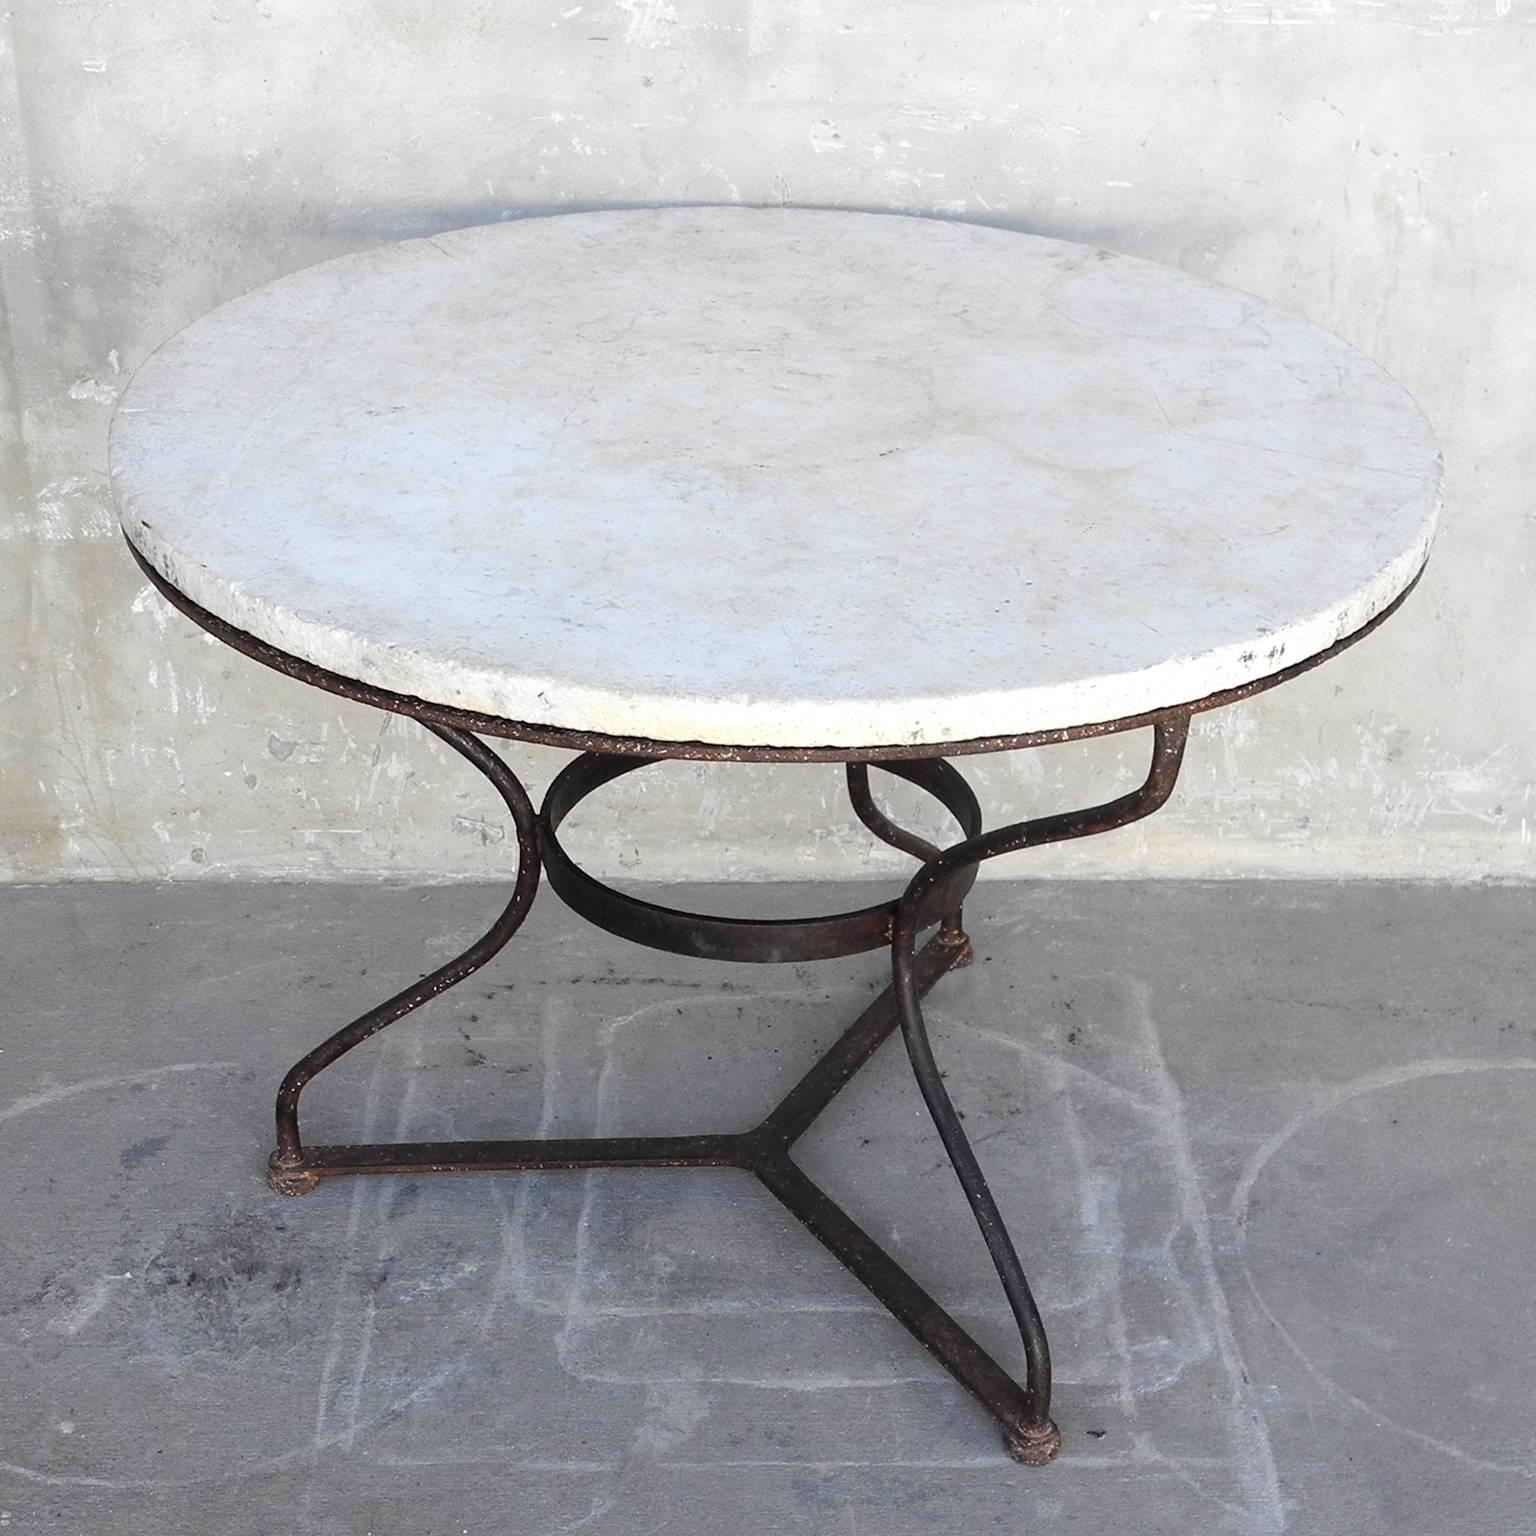 This antique French gueridon table, circa 1950, boasts a beautiful white marble top with strong iron base. It is in great condition, having minimal patina and aged marks. It is very sturdy and versatile. It is a medium sized table, so it can work as